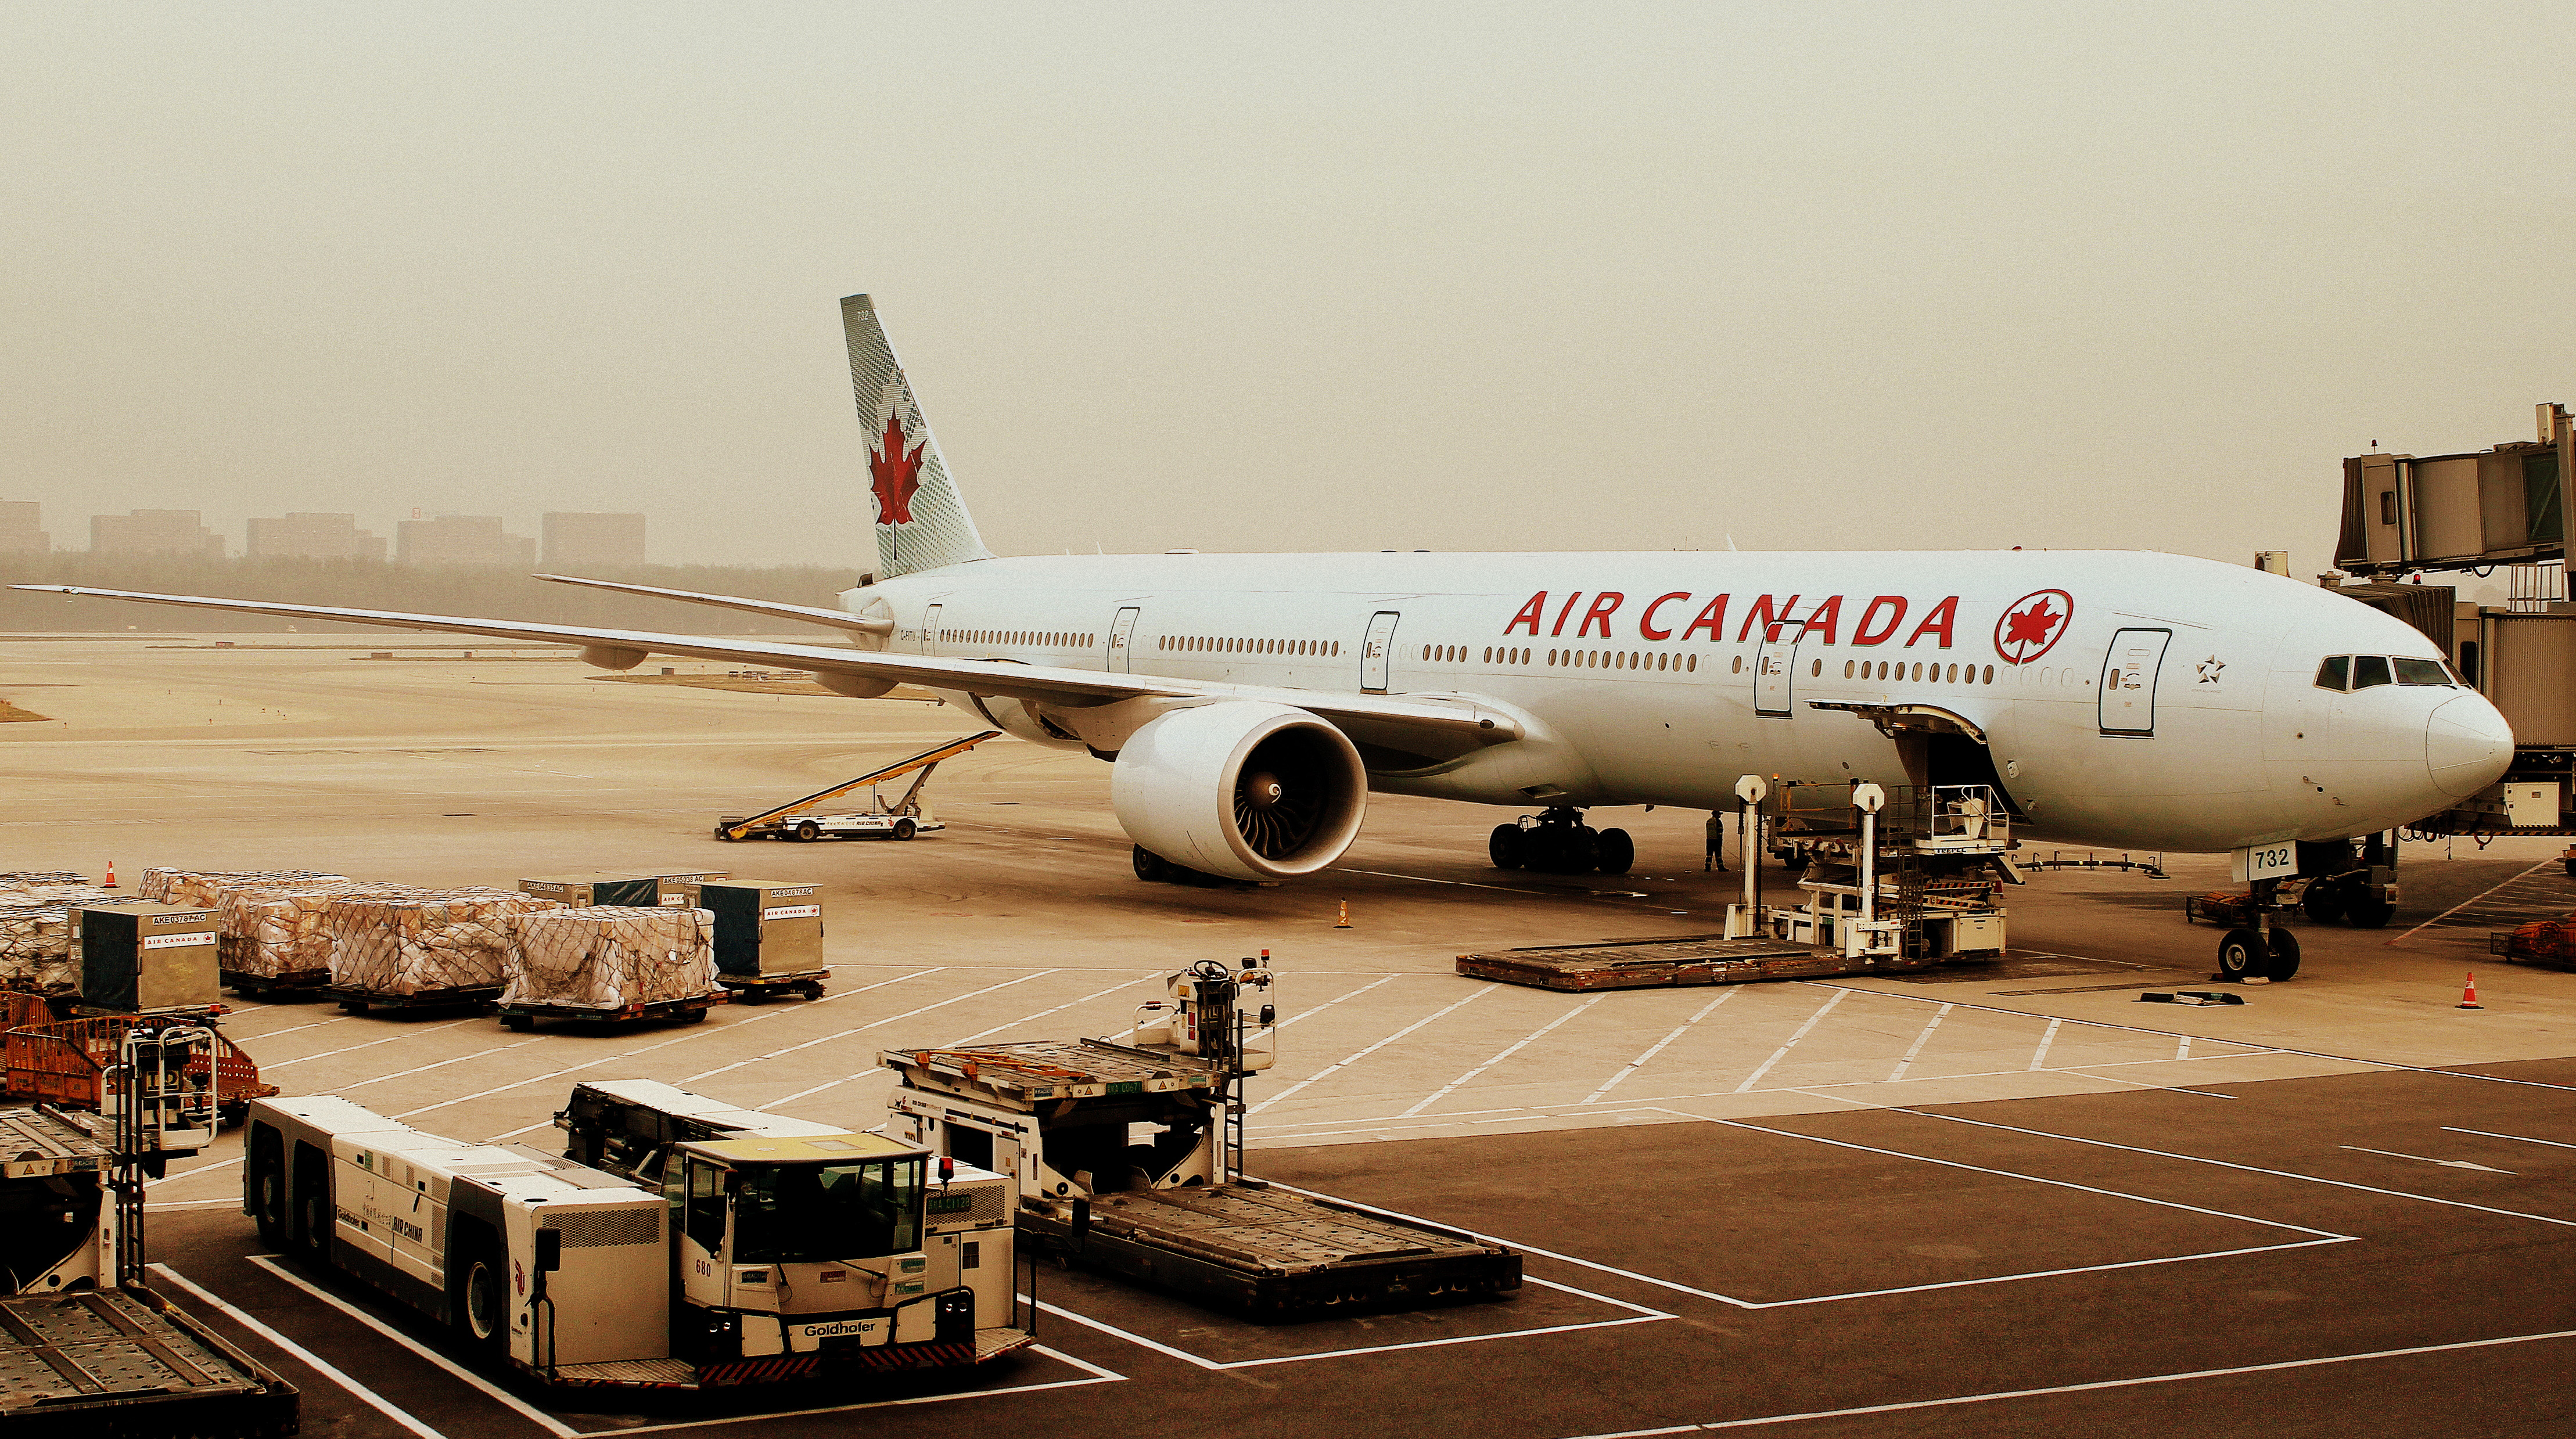 AIR CANADA BOEING 777-300 AT BEIJING CAPITAL AIRPORT CHINA OCT 2012 (8216560635)